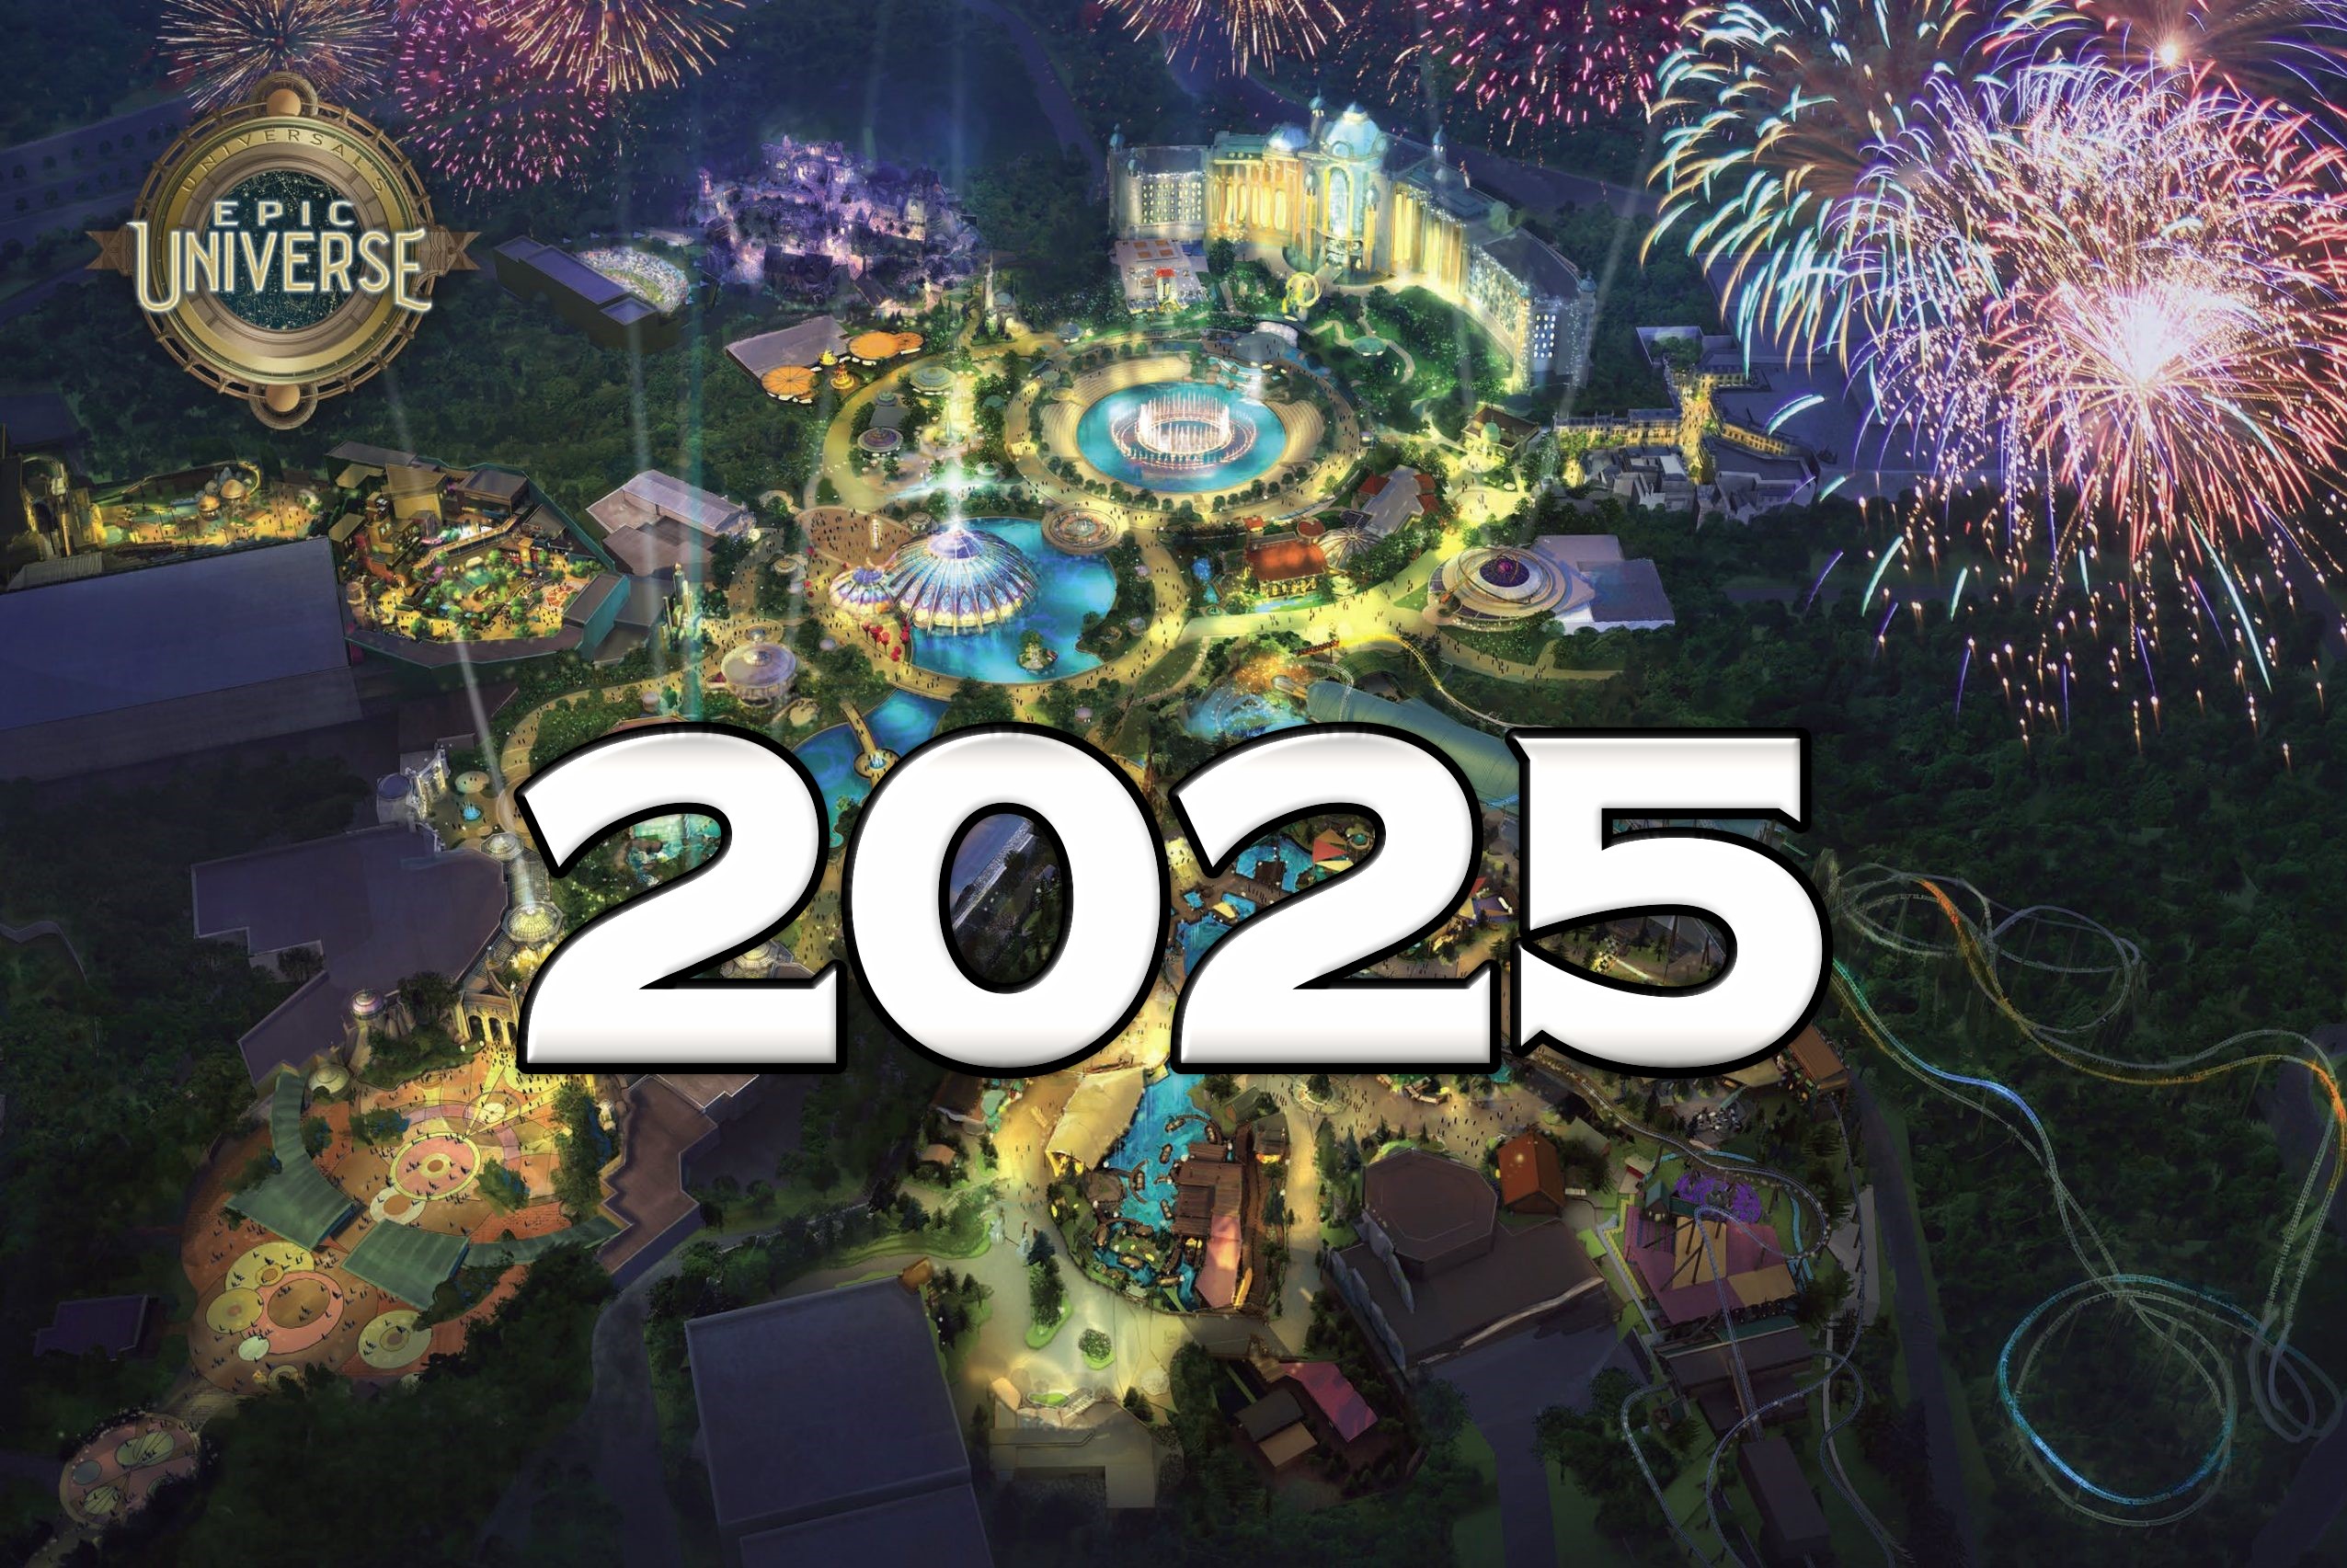 Comcast Says Epic Universe to Open in 2025, Theme Park Business in